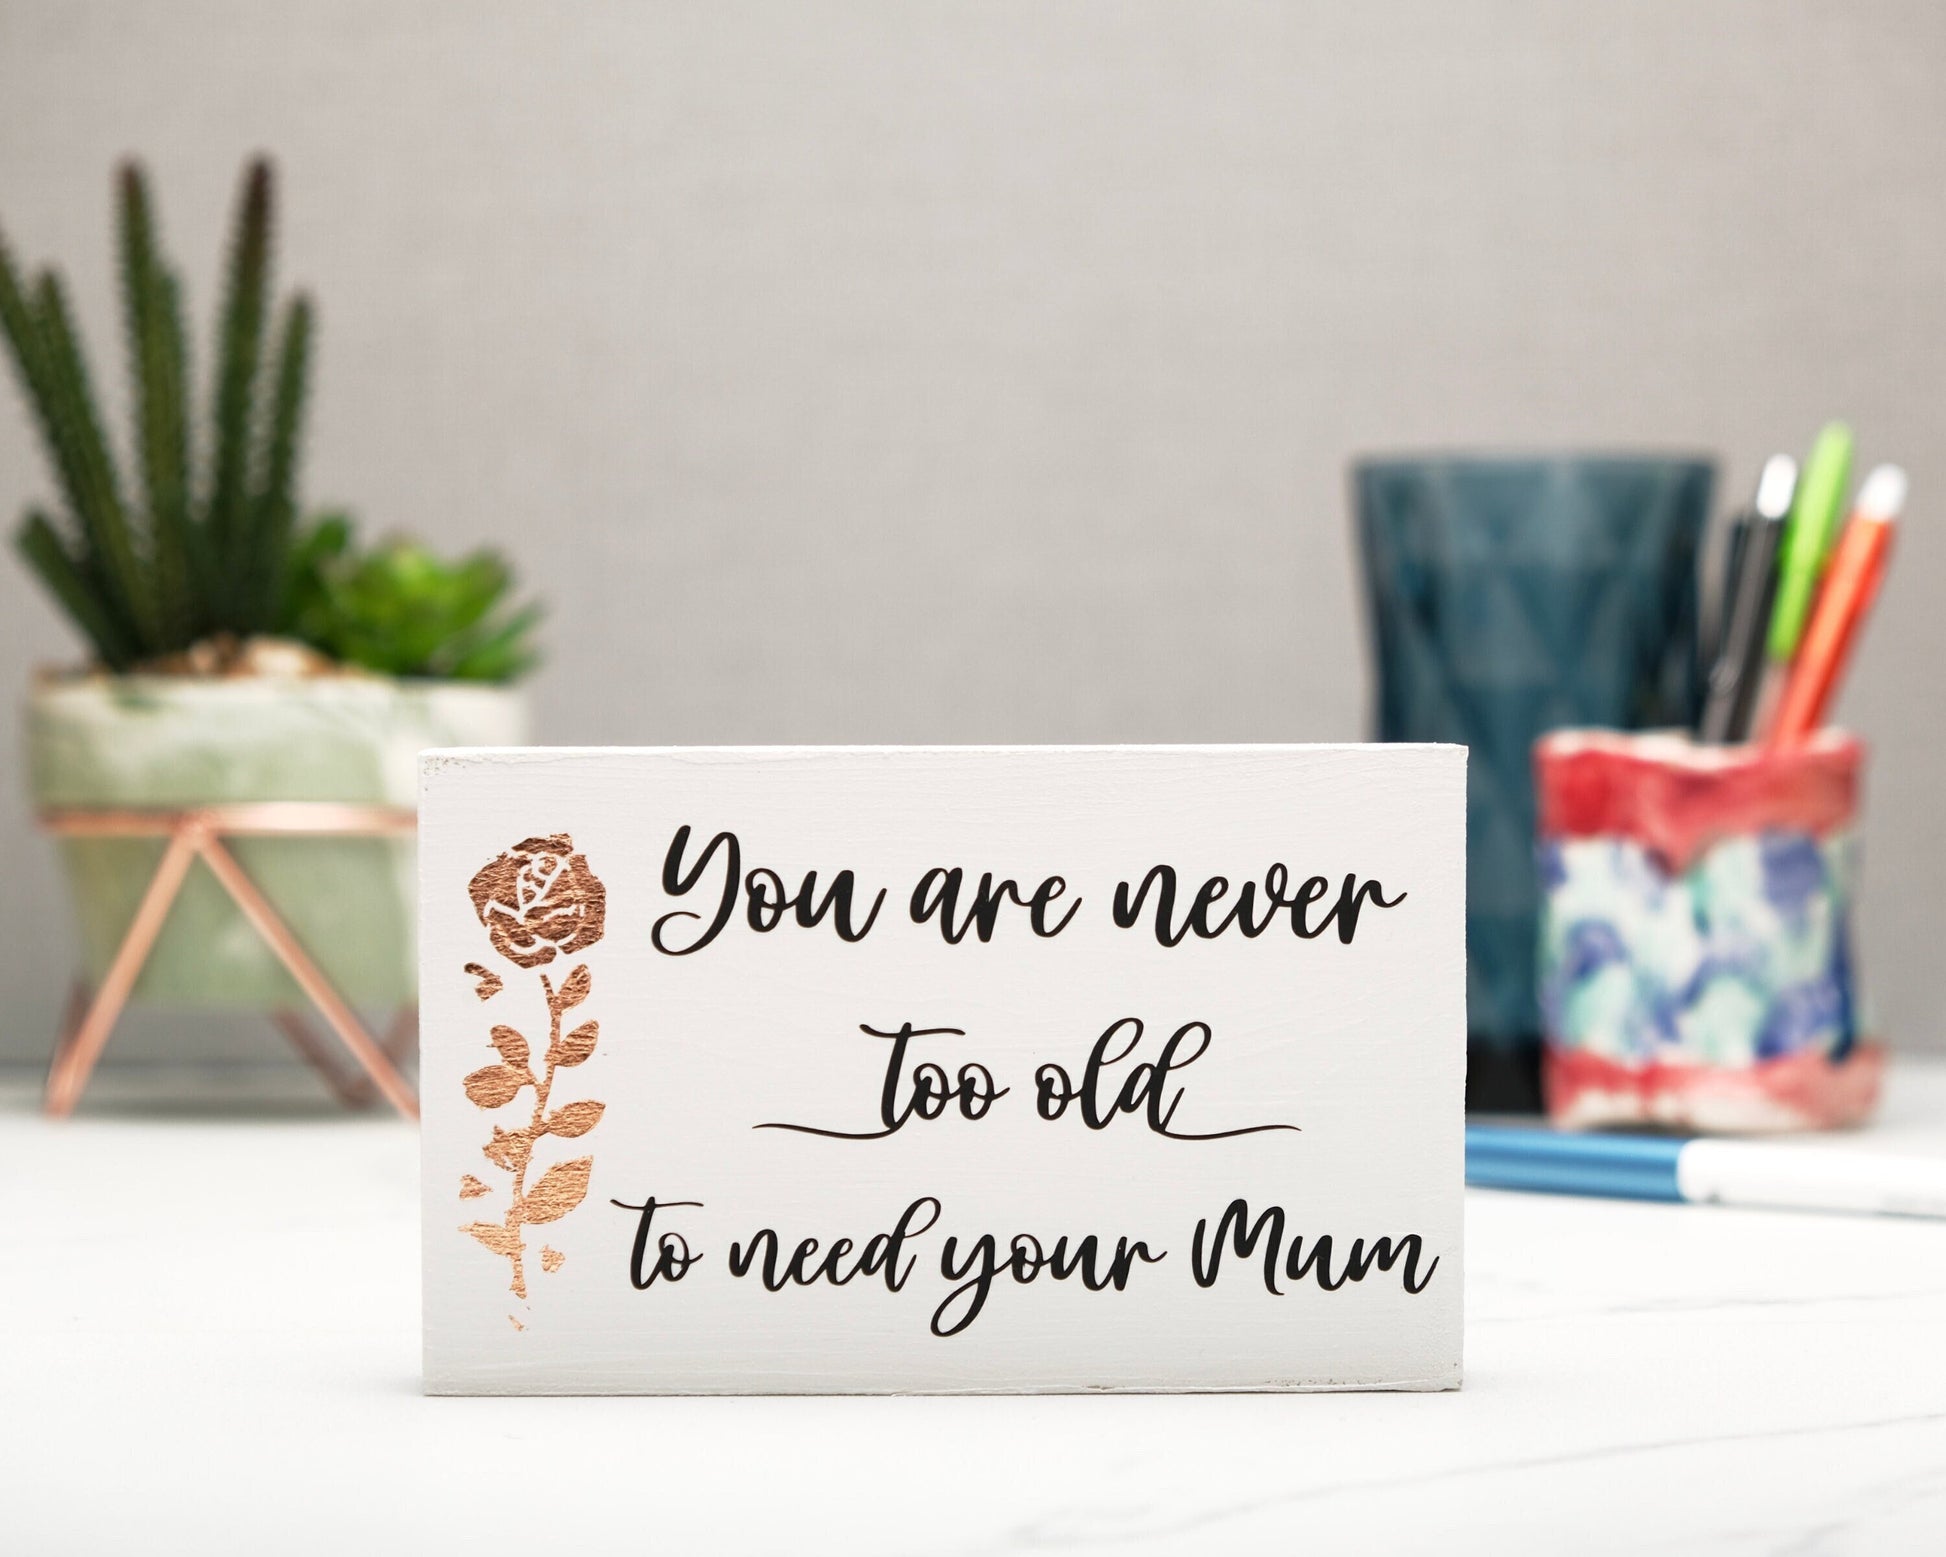 Small freestanding rectangular wooden sign facing straight on. White wood stain with bronze rose gold tall rose flower on left side. Black message in emotive font, You are never too old to need your Mum. Plant and pen pot out of focus in background.